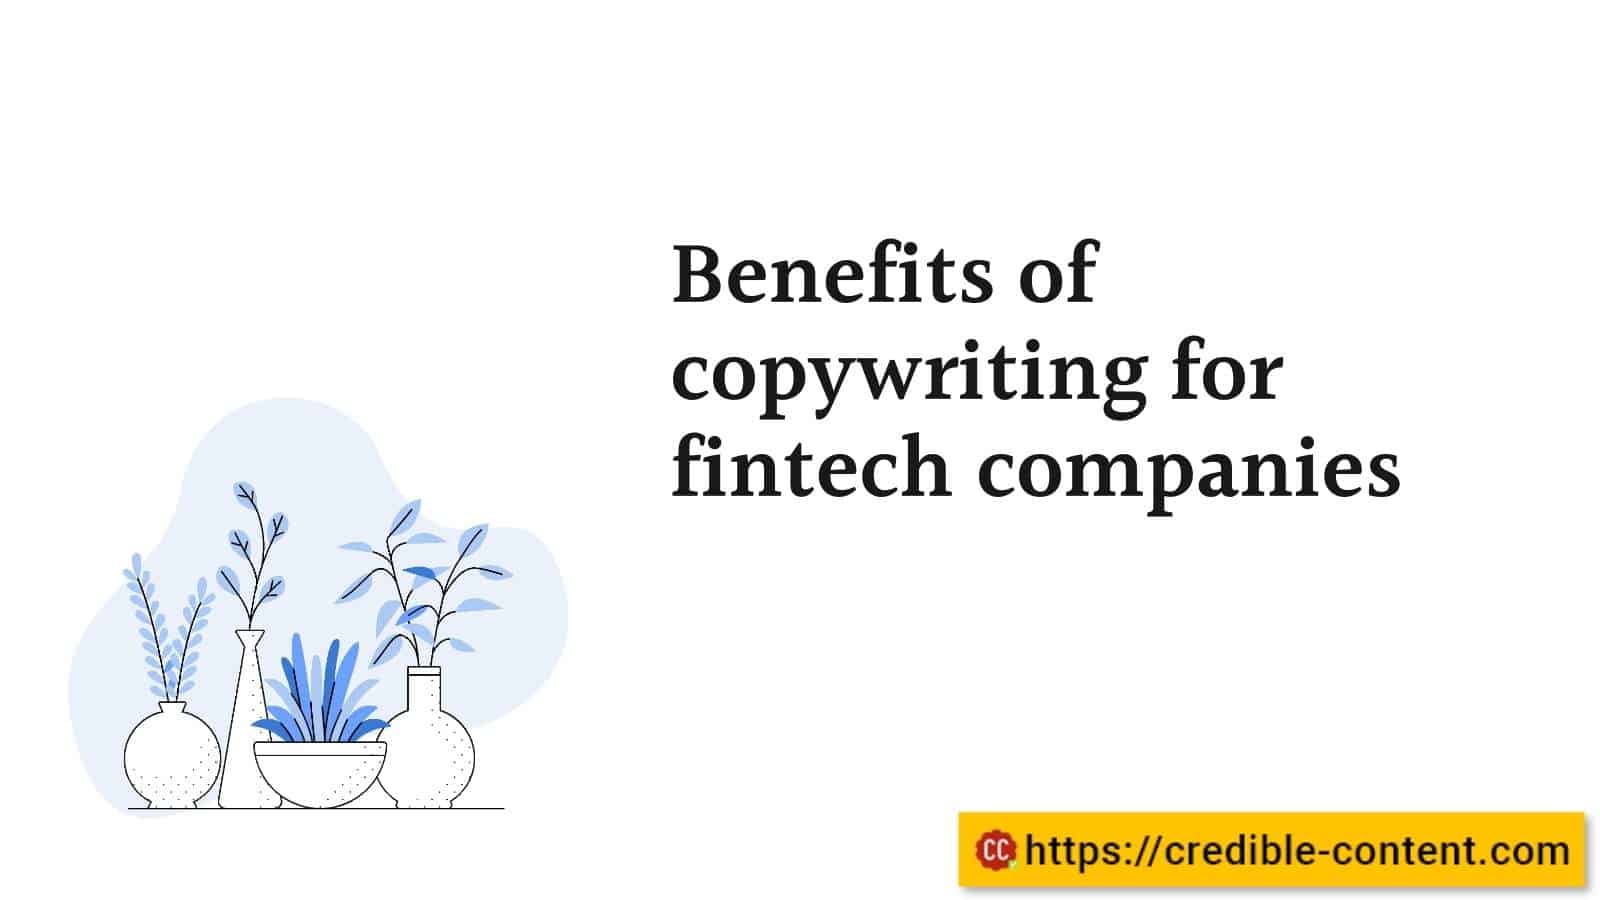 Benefits of copywriting services for fintech companies